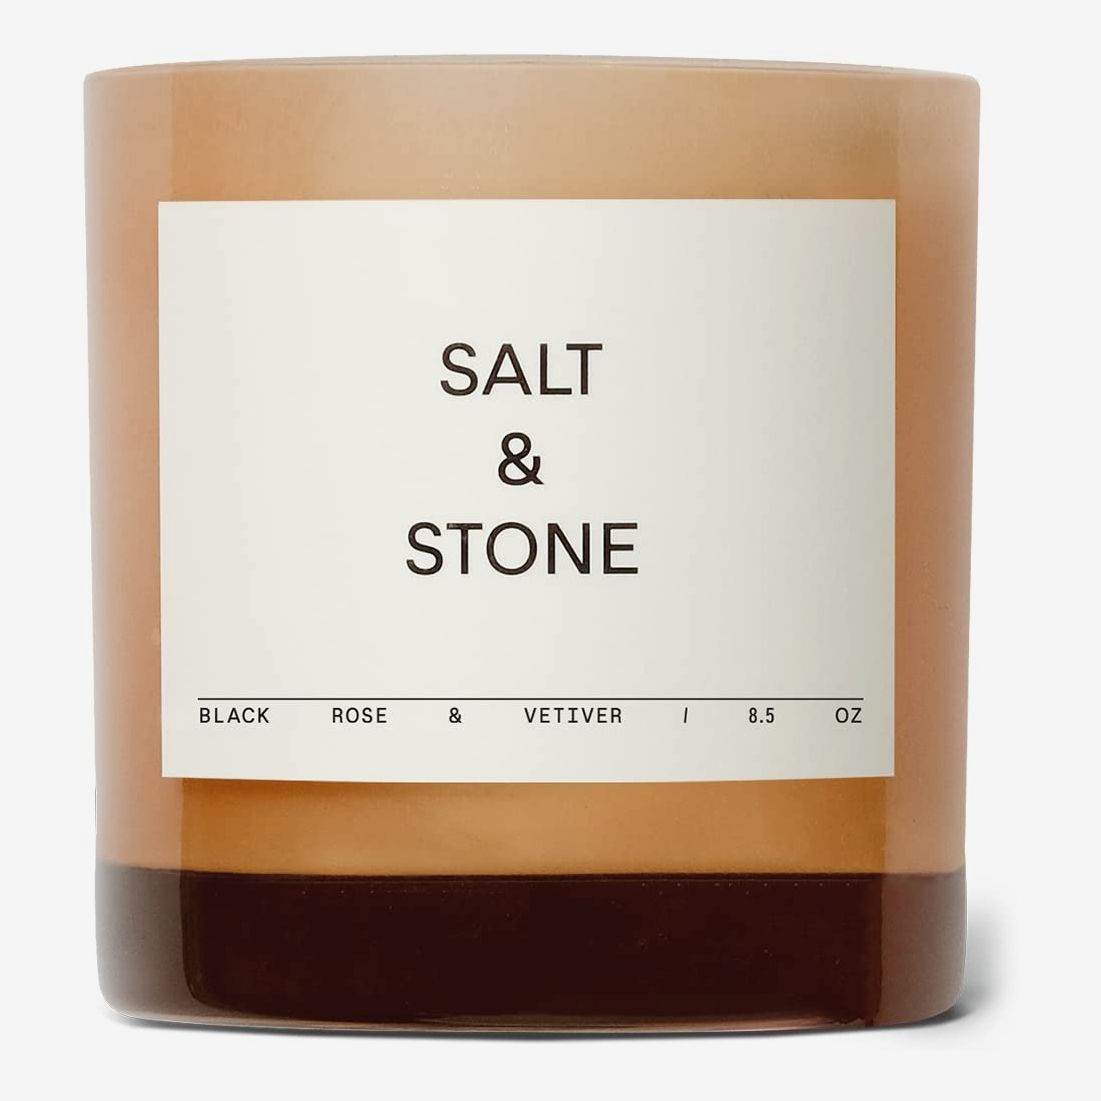 Salt & Stone Hand-poured Scented Candles